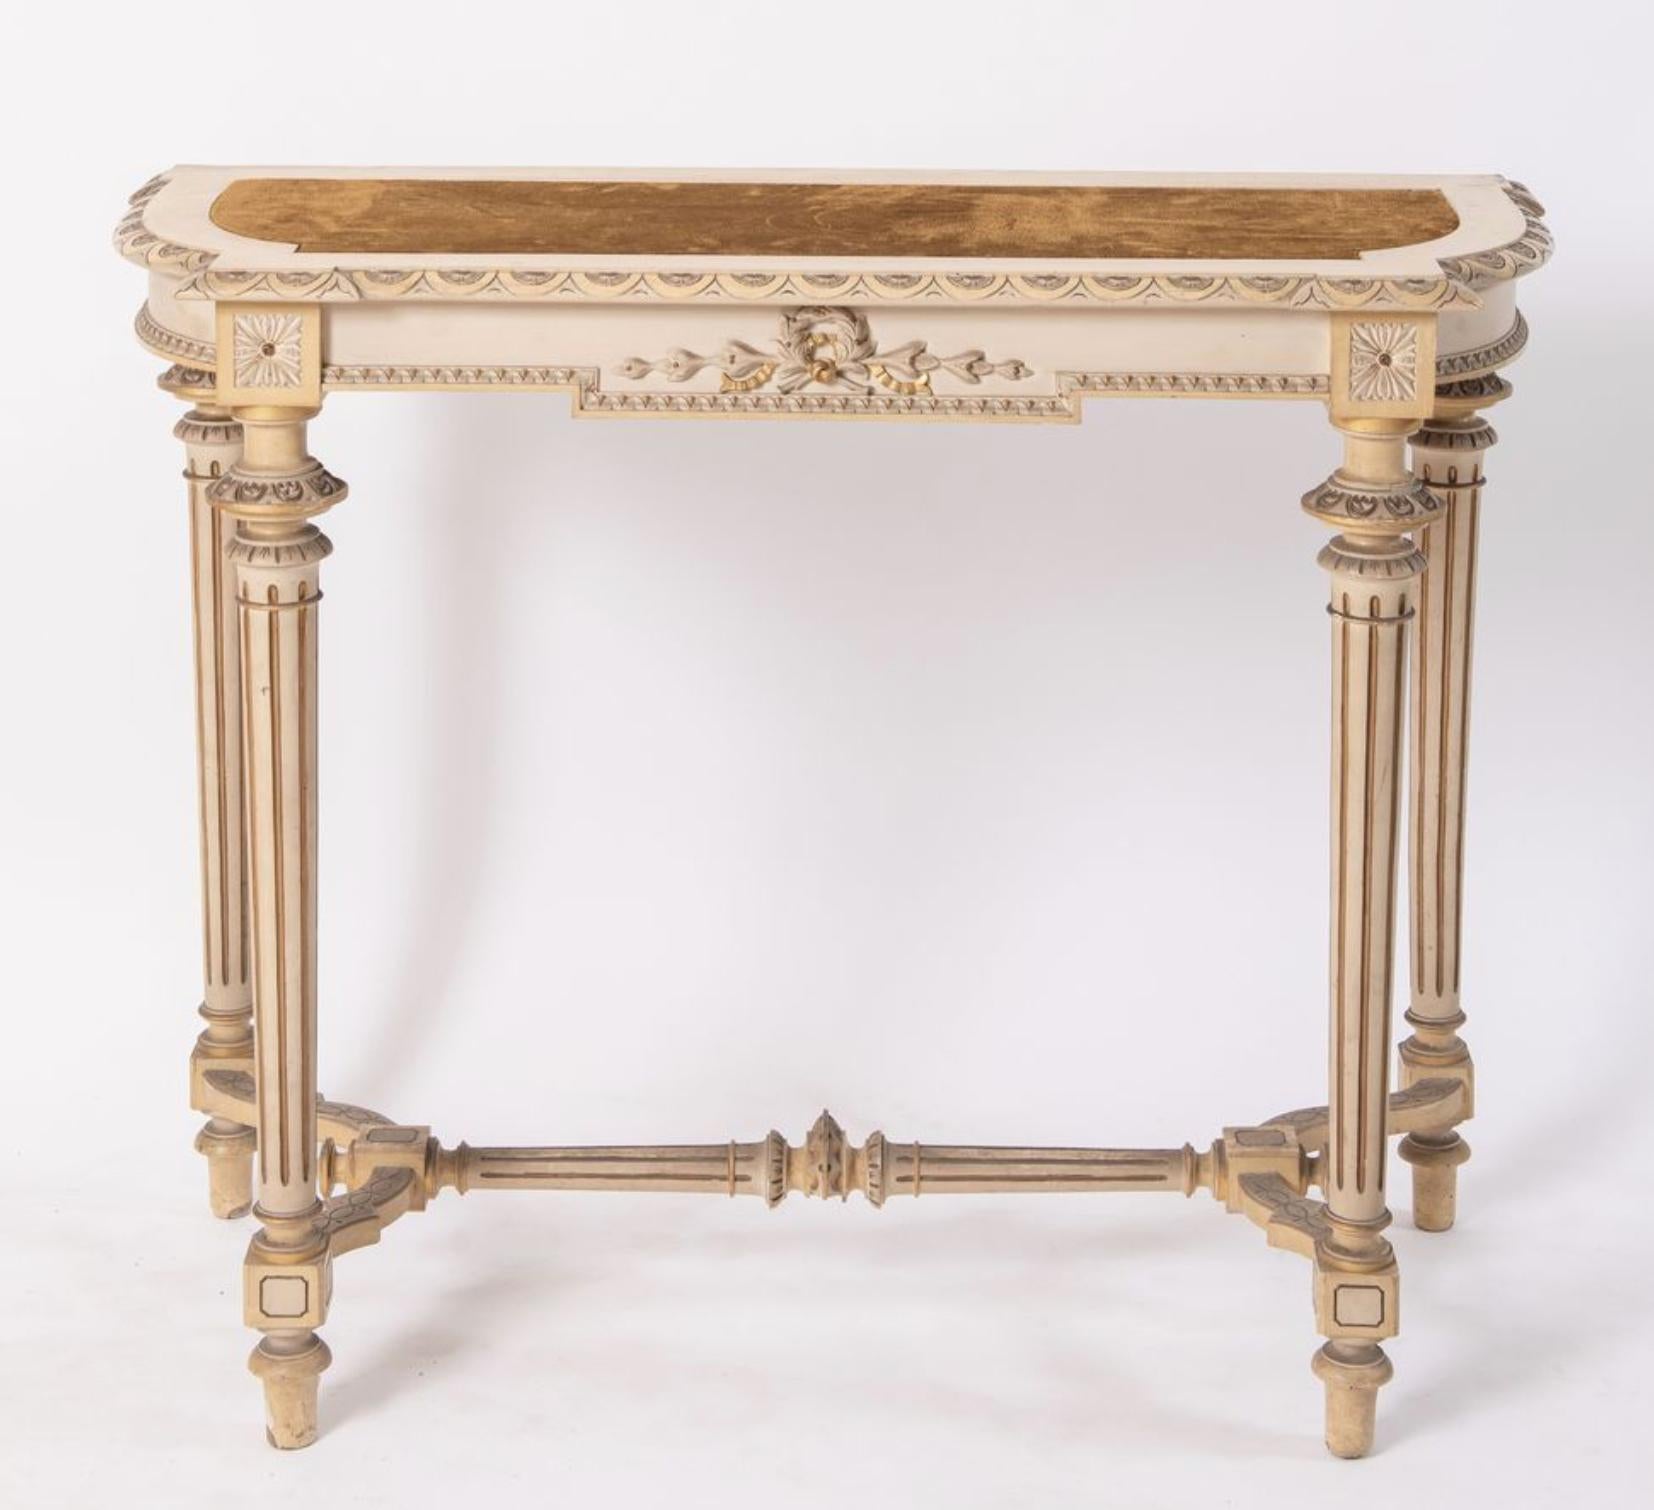 French wooden hand painted console table with cognac velvet top. The table is hand carved with typical details for Louise XVI style like the gilt wood ribbons at the front and the fluted legs connected at the bottom. All the details are made very